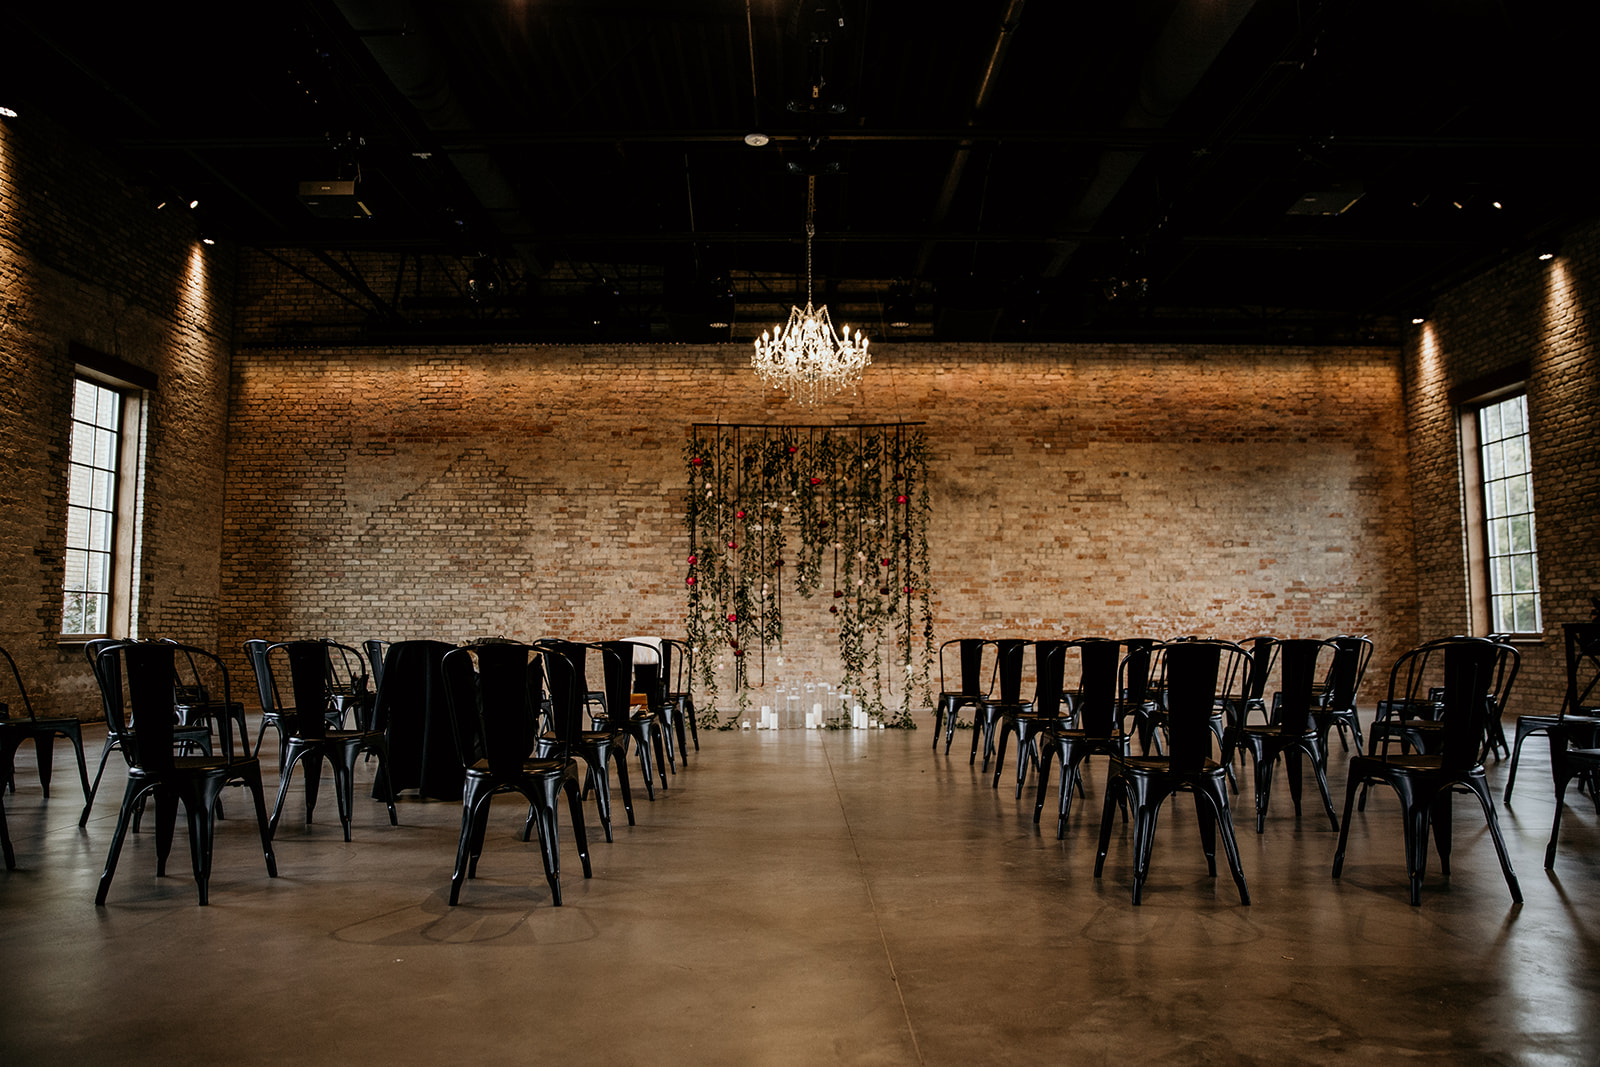 industrial wedding venue ceremony space decorated with hanging florals and candles